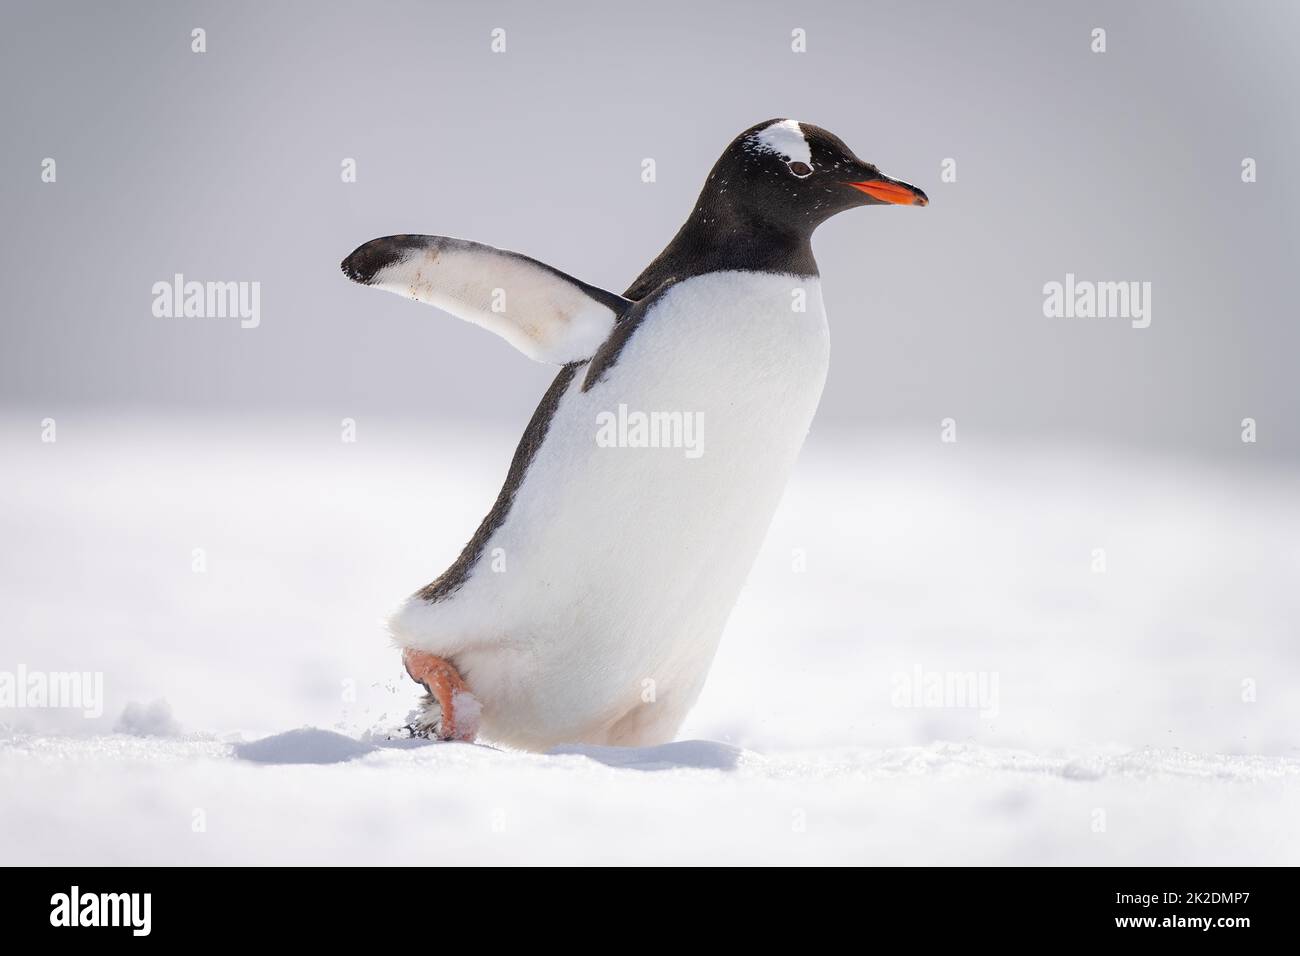 Gentoo penguin waddles across snow facing right Stock Photo